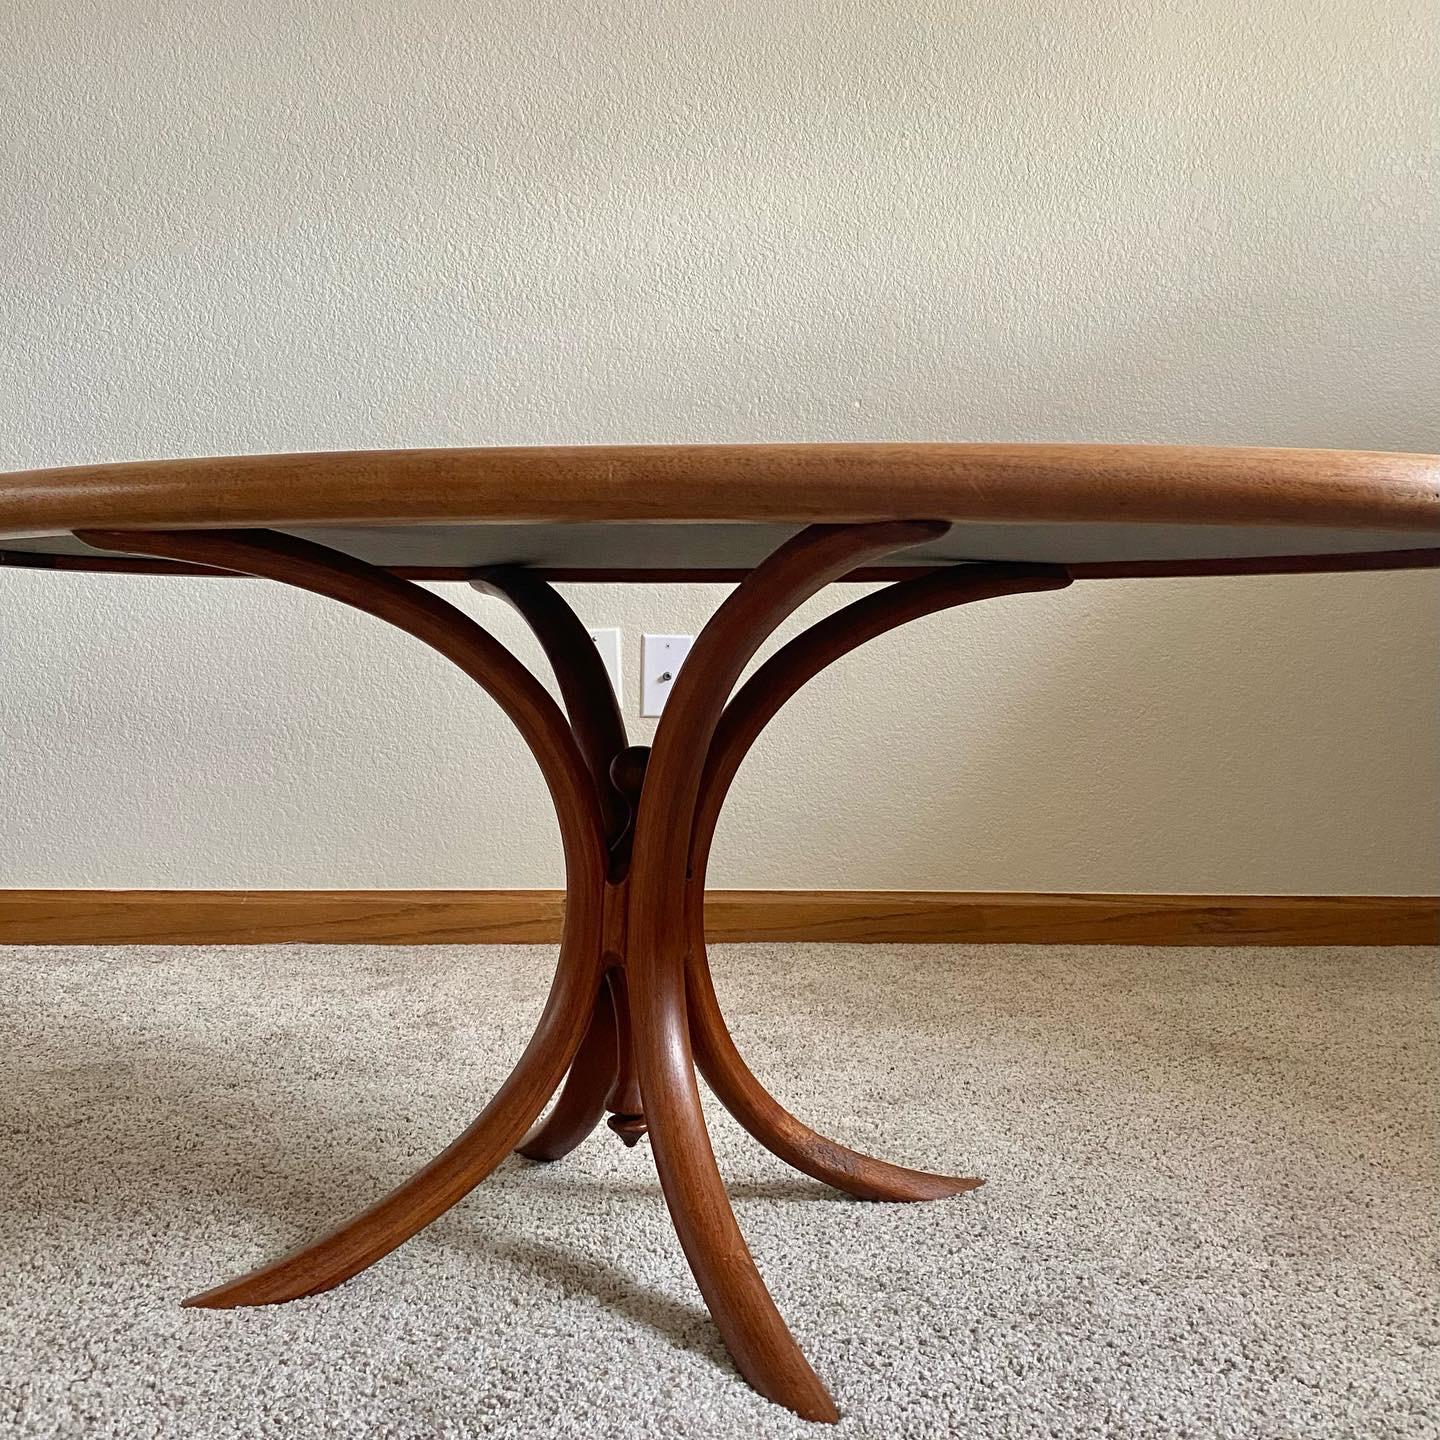 One of Kind, Studio Craft, Sculptural Cocktail Table in Walnut, Cherry + Wenge For Sale 1